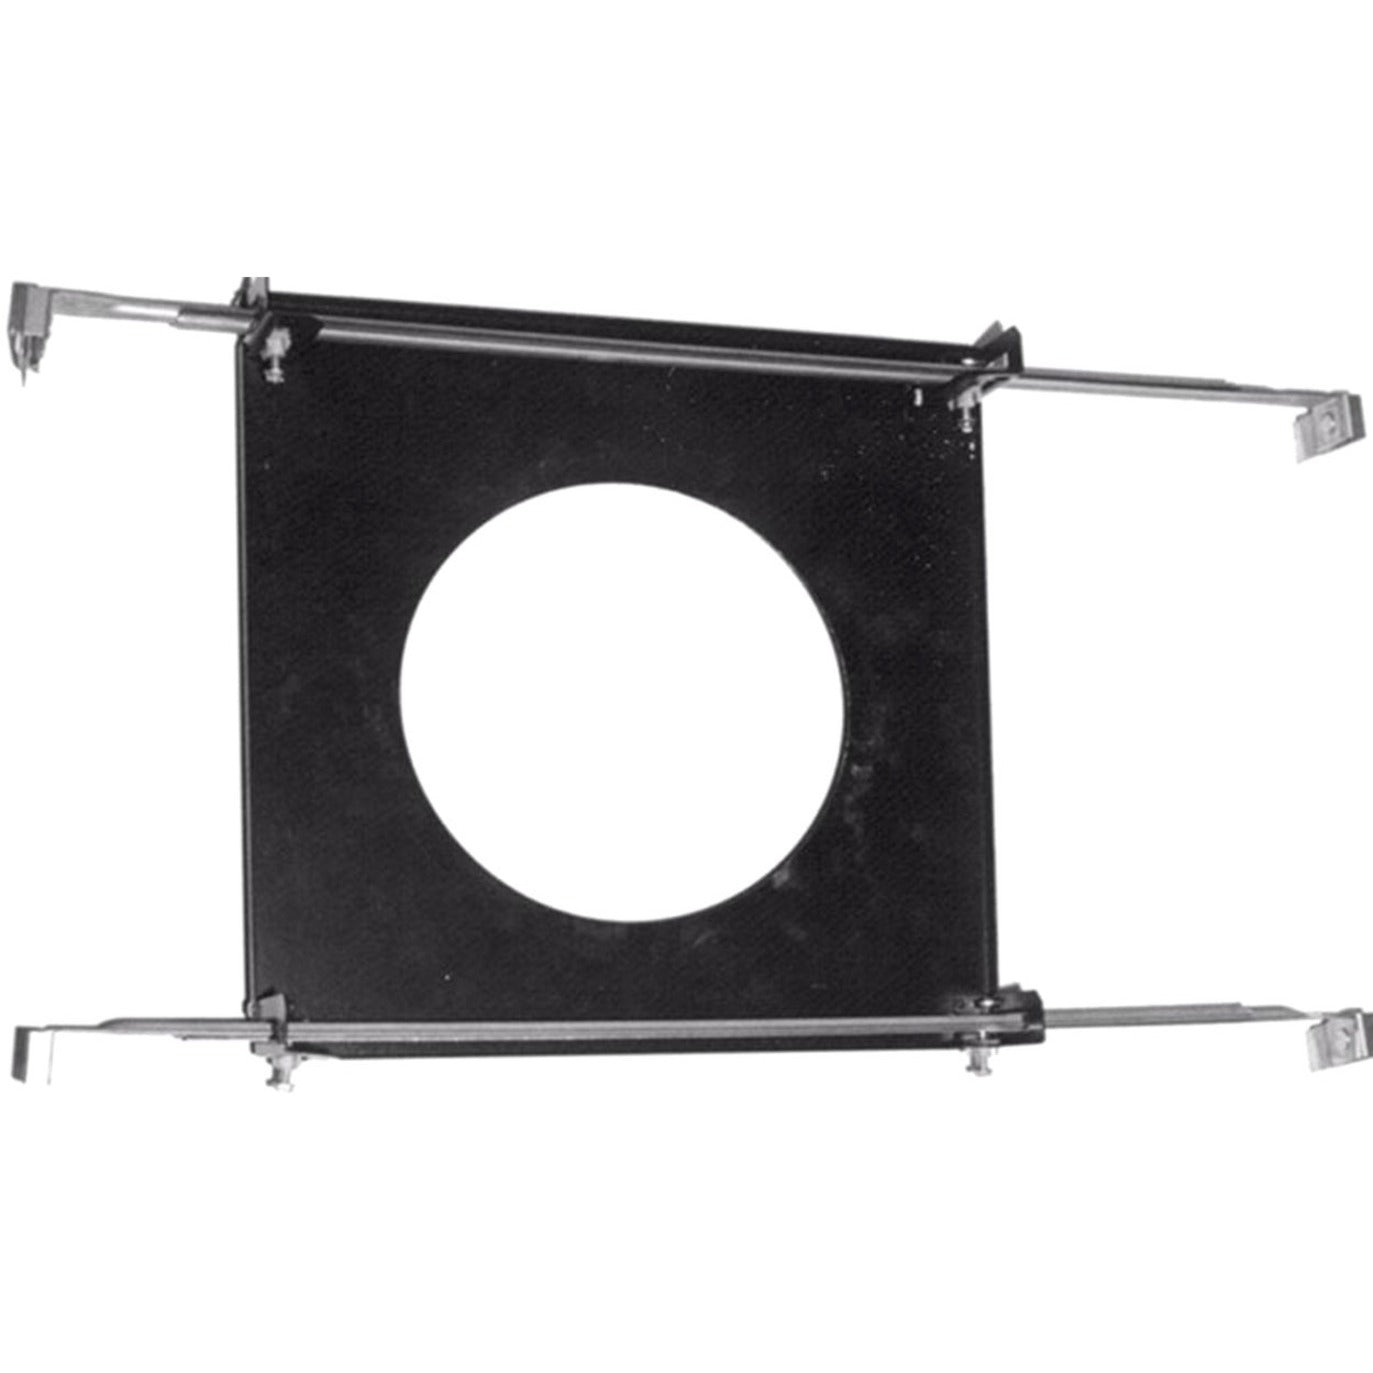 Bosch VGA-IC-SP In-ceiling Support Kit, Sturdy Ceiling Mount for Network Camera [Discontinued]